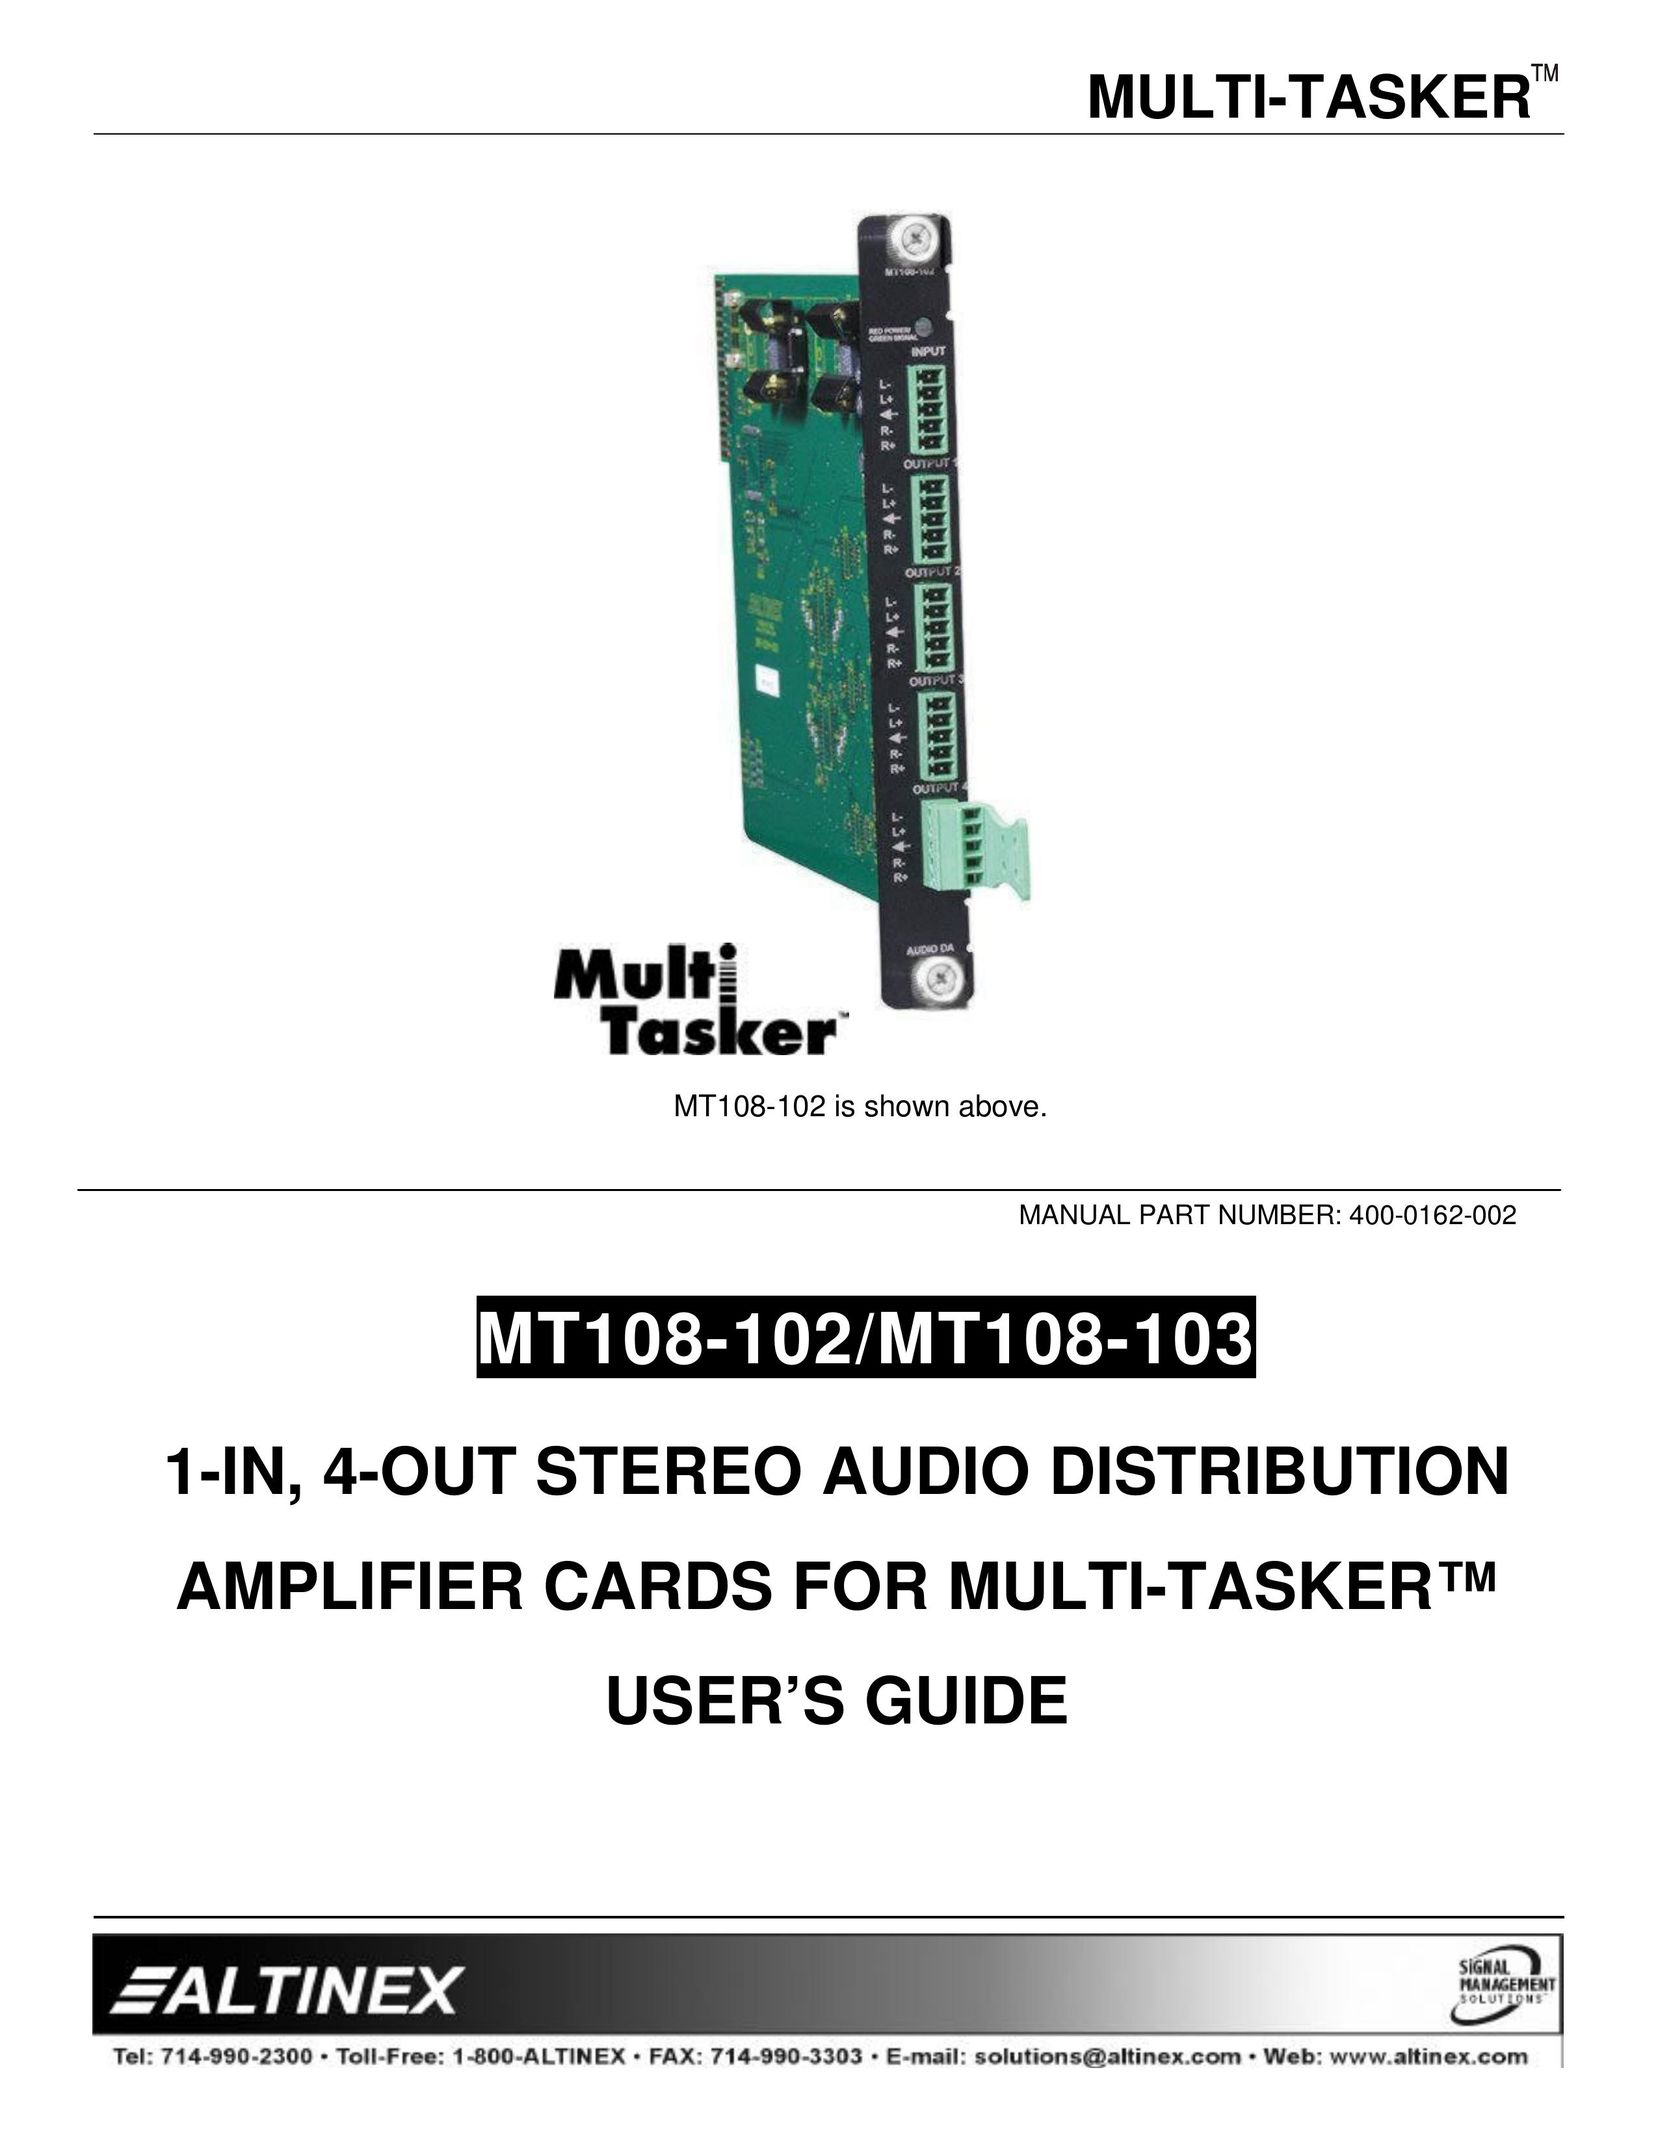 Altinex MT108-102 Stereo Amplifier User Manual